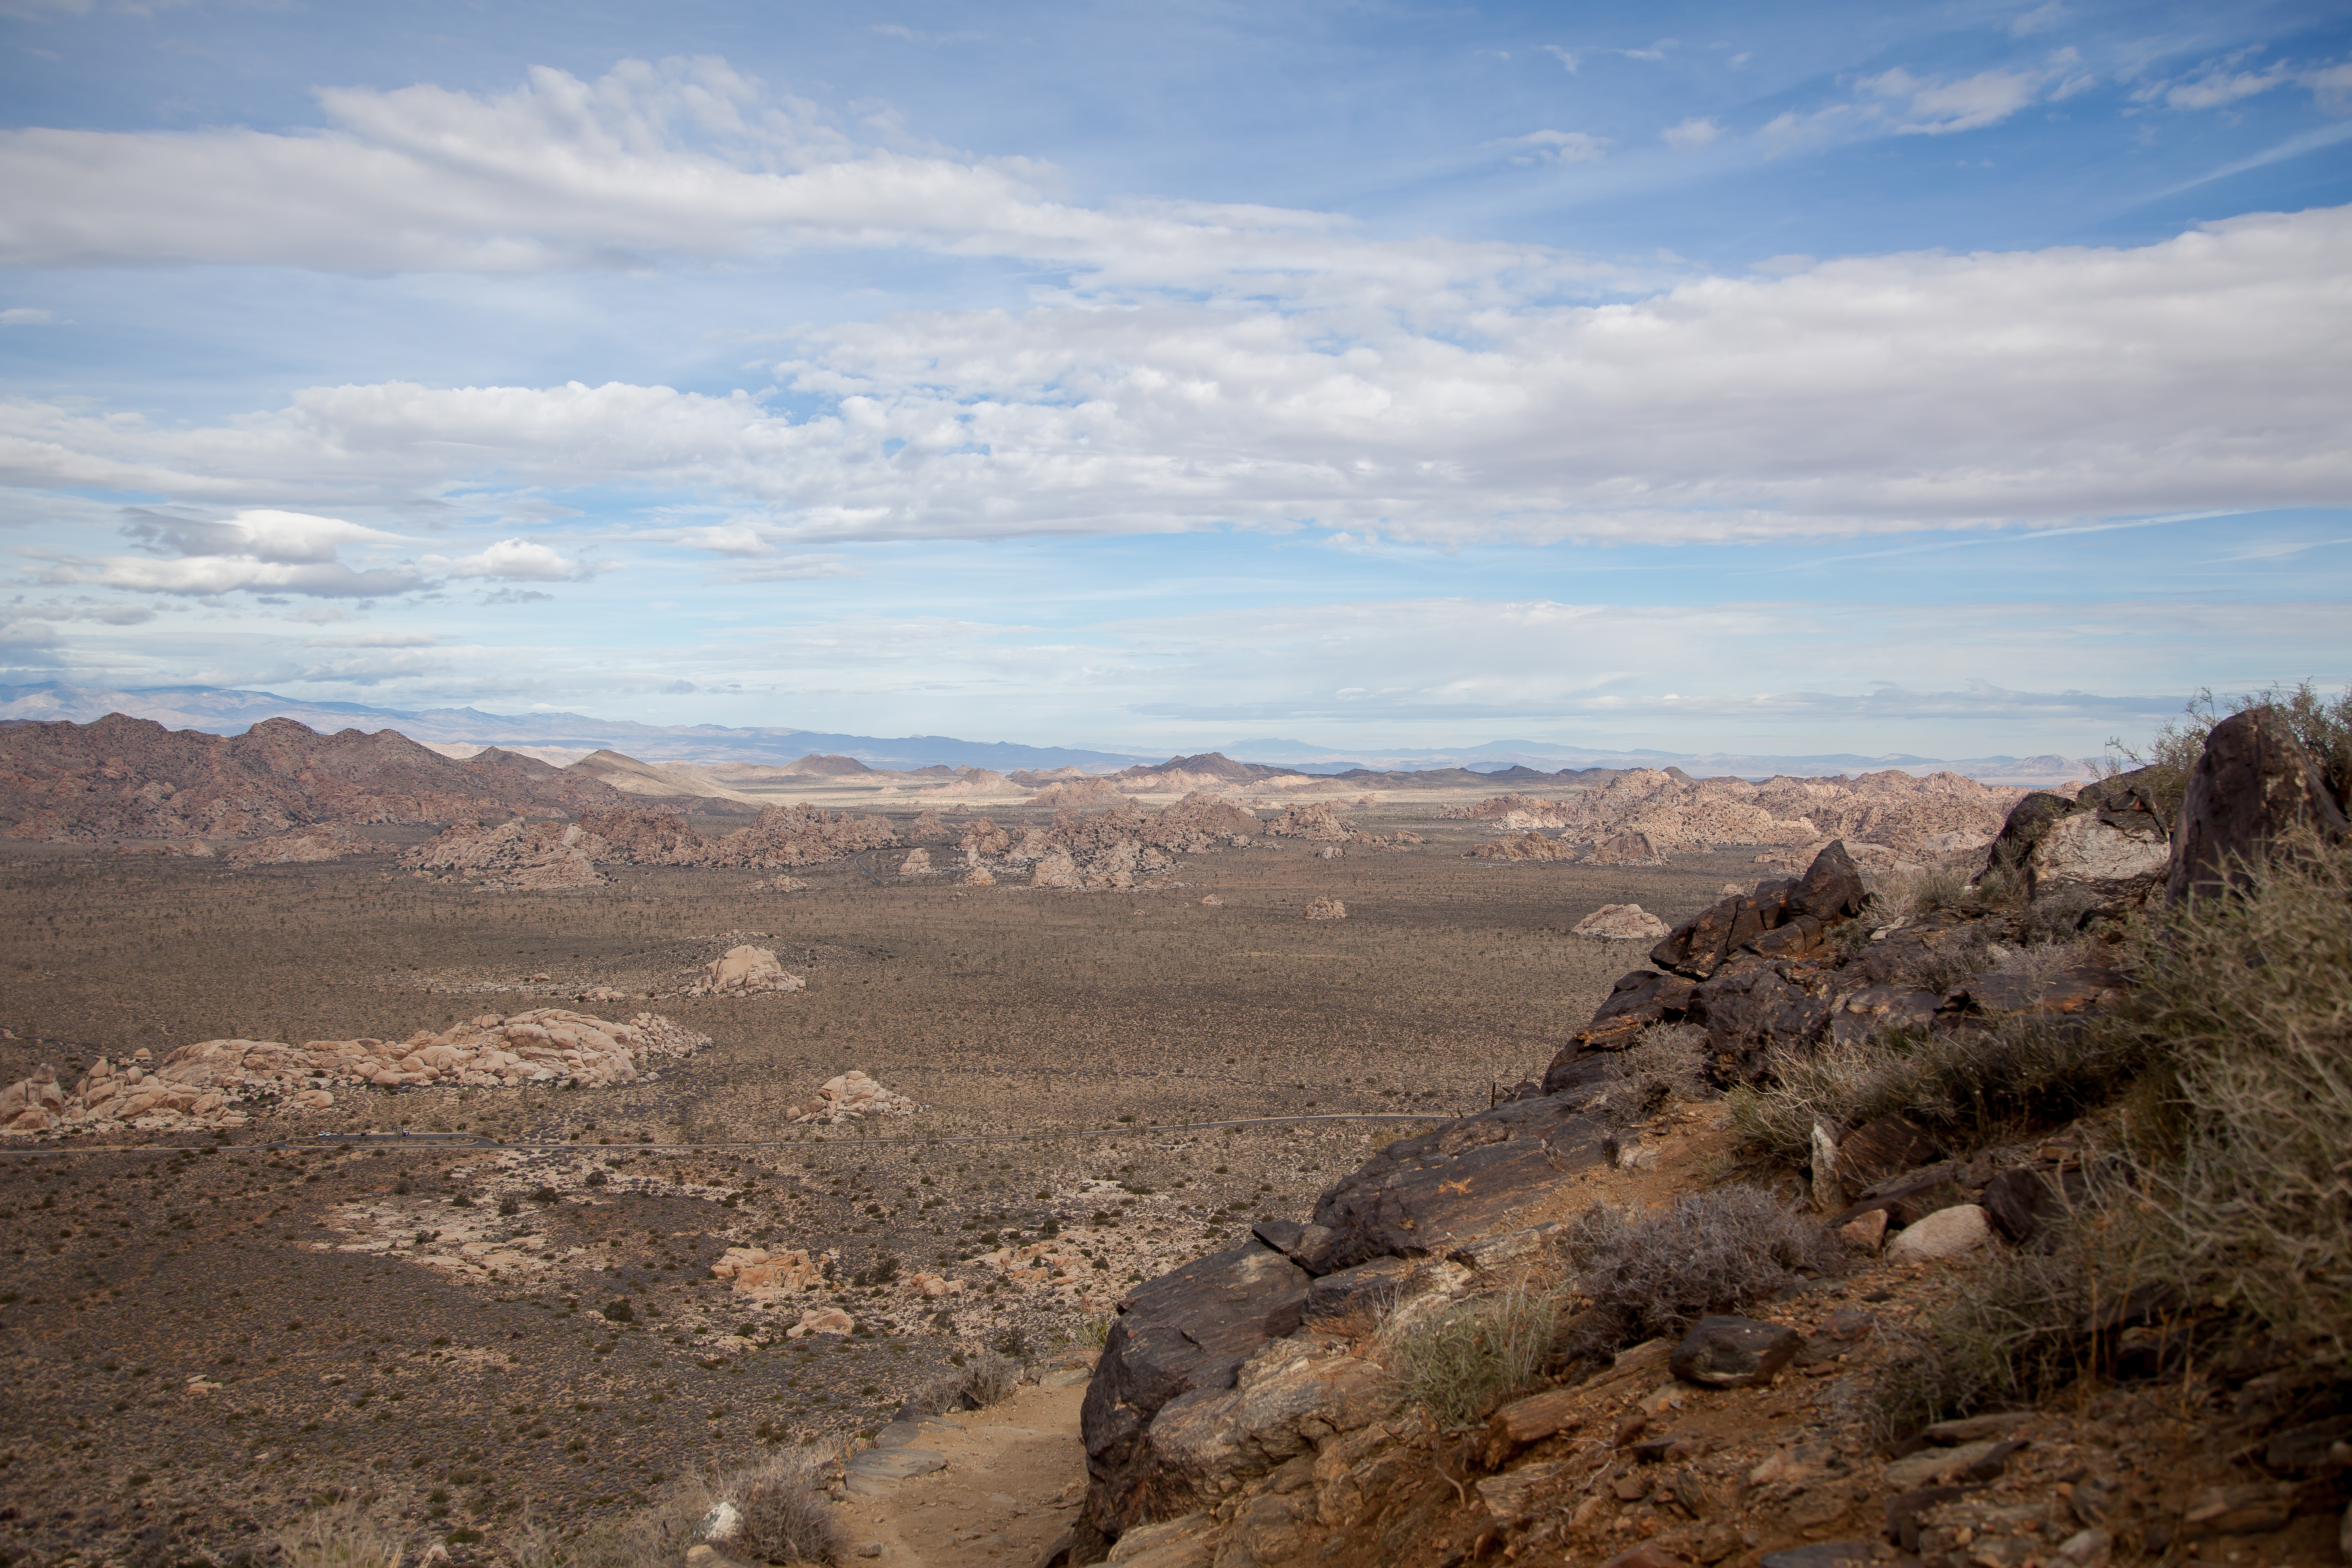 a view of the desert in Joshua Tree National Park